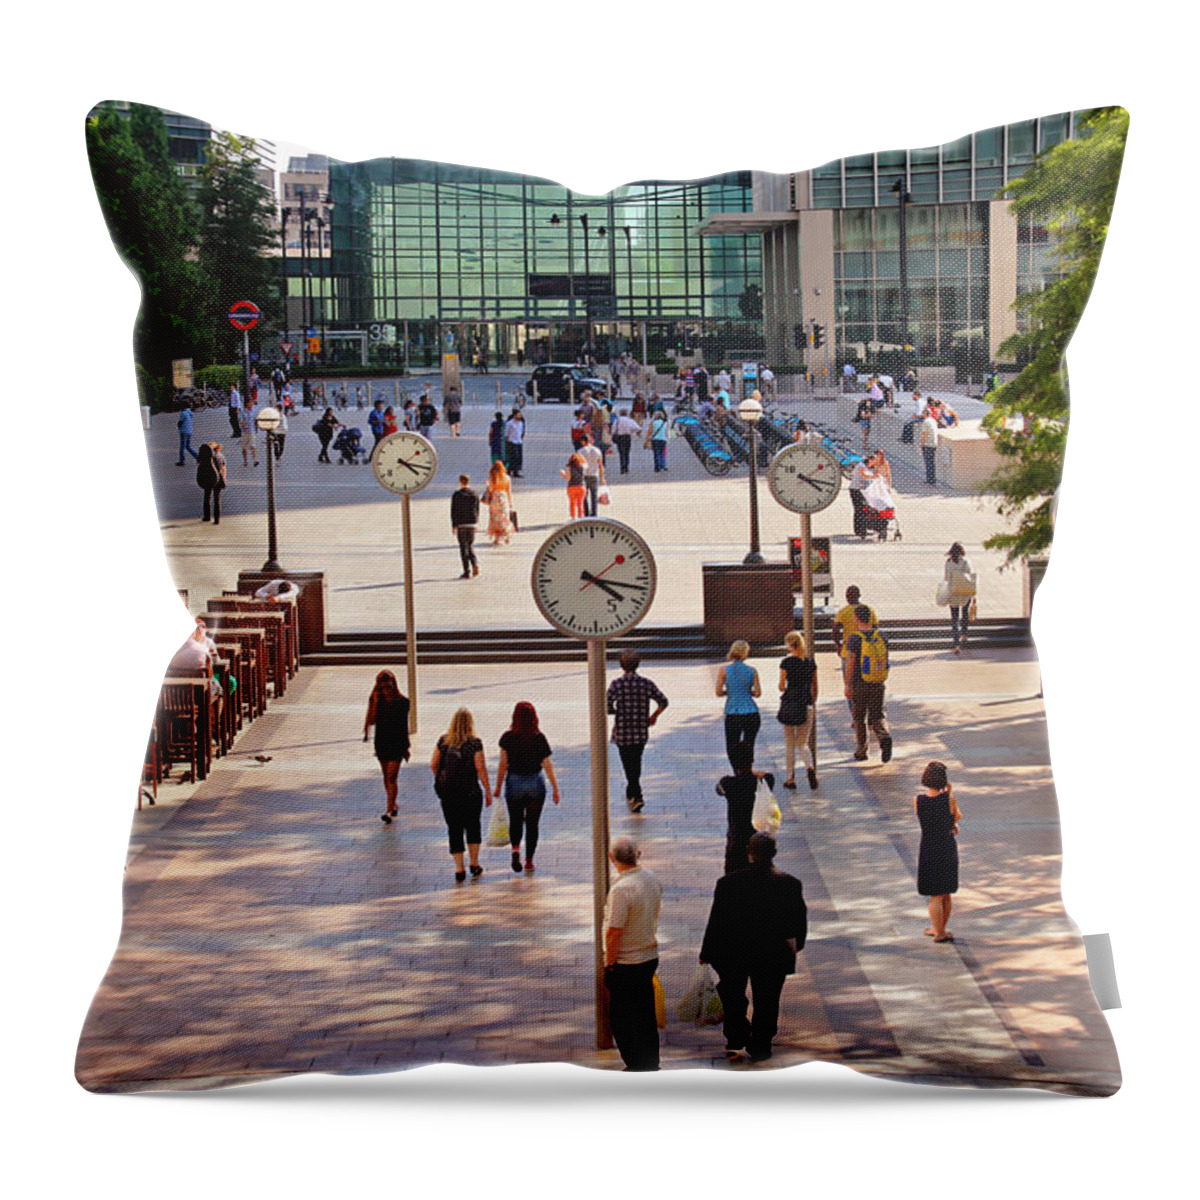 Canary Wharf Throw Pillow featuring the photograph Meet Me by the Clock by Nicky Jameson